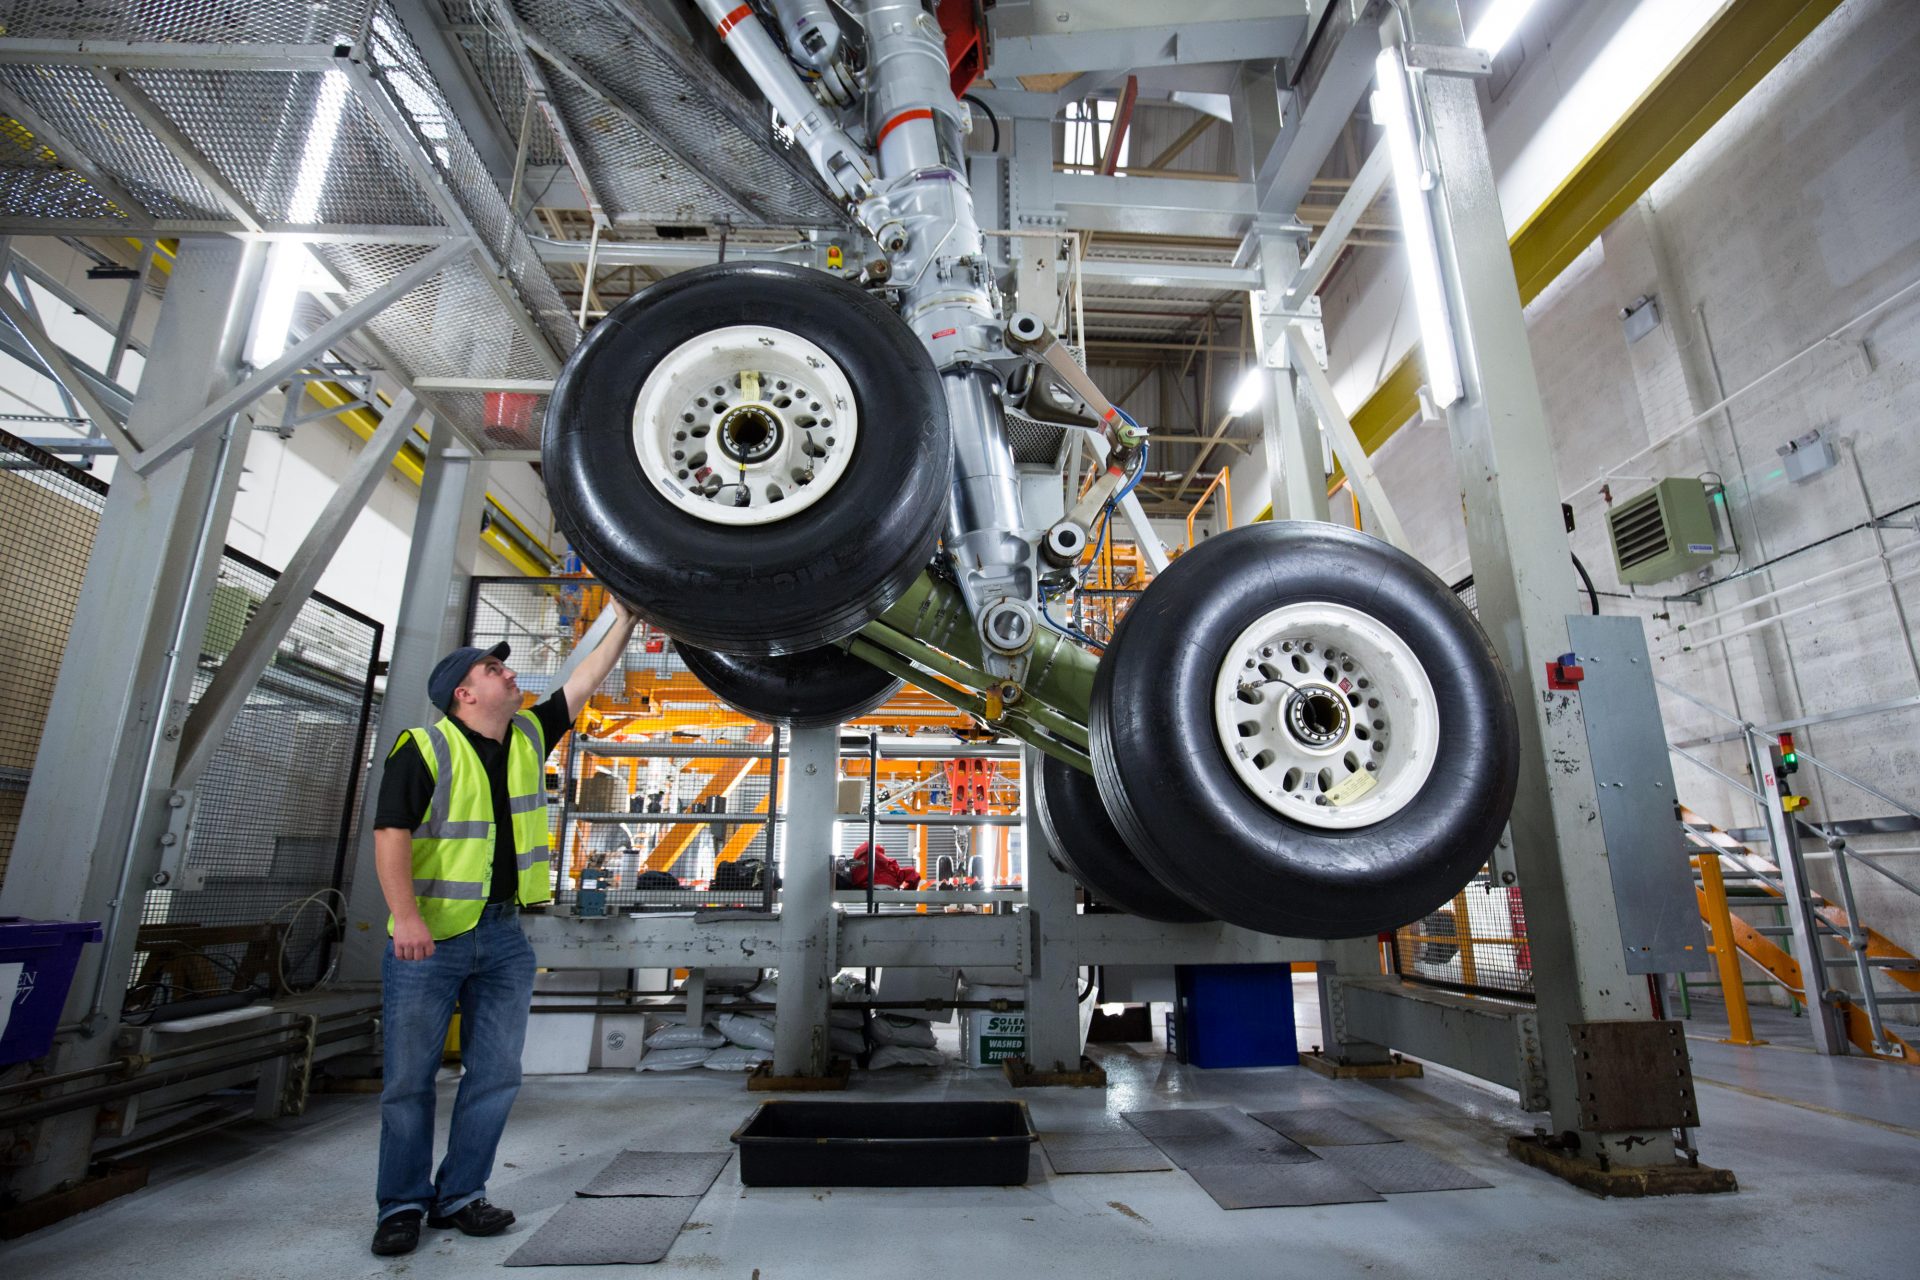 Landing gear is tested at Airbus’ site at Filton, Bristol. Photo: Matt Cardy/Getty Images.